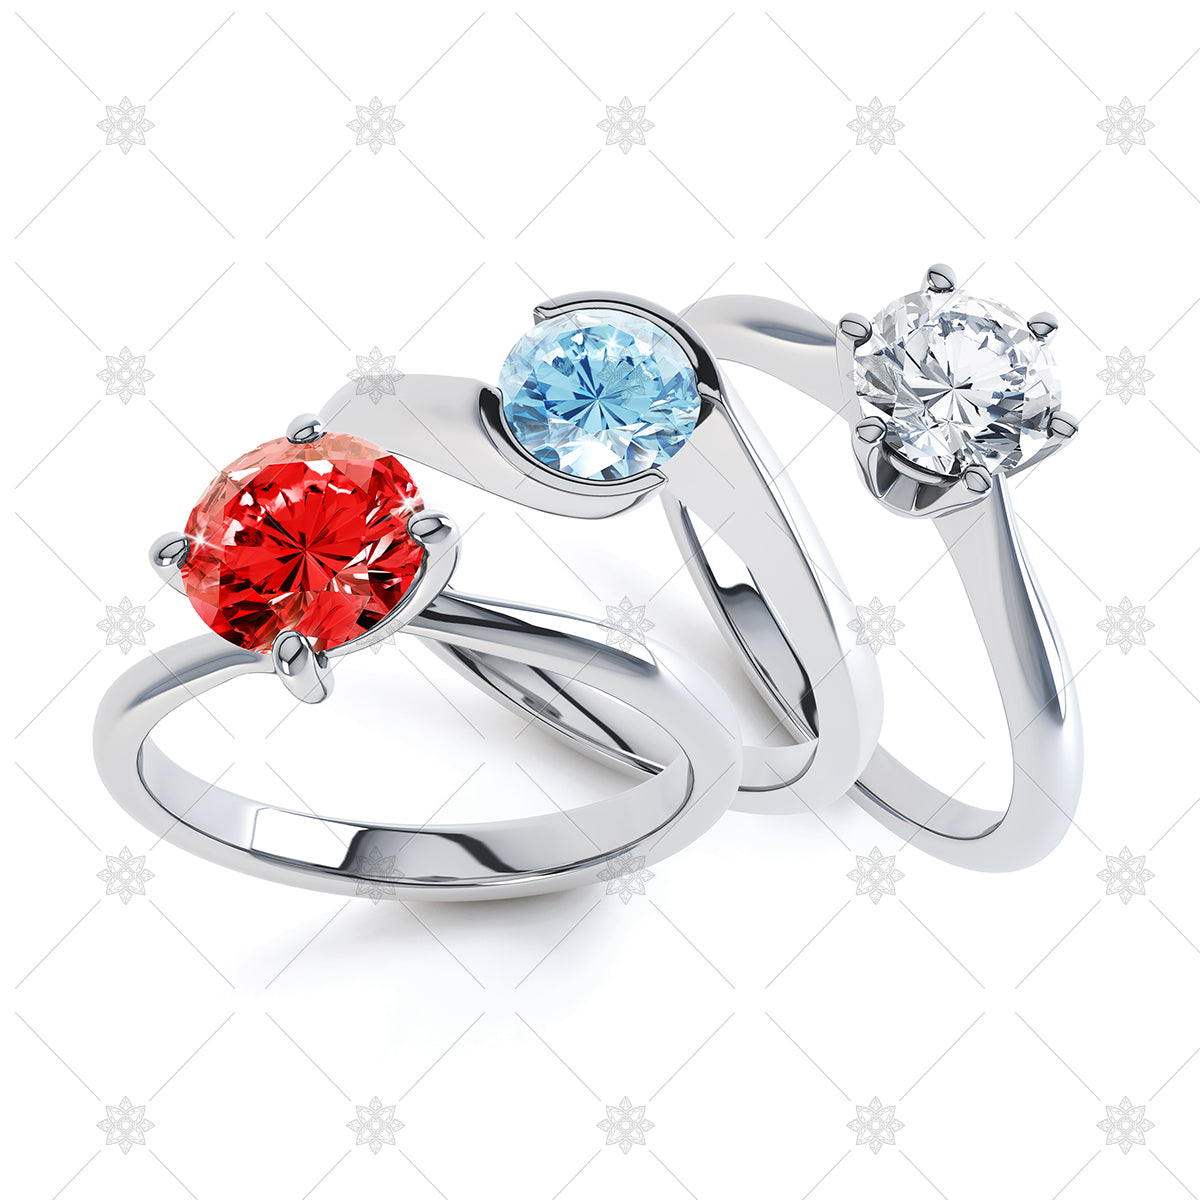 red white and blue diamond rings